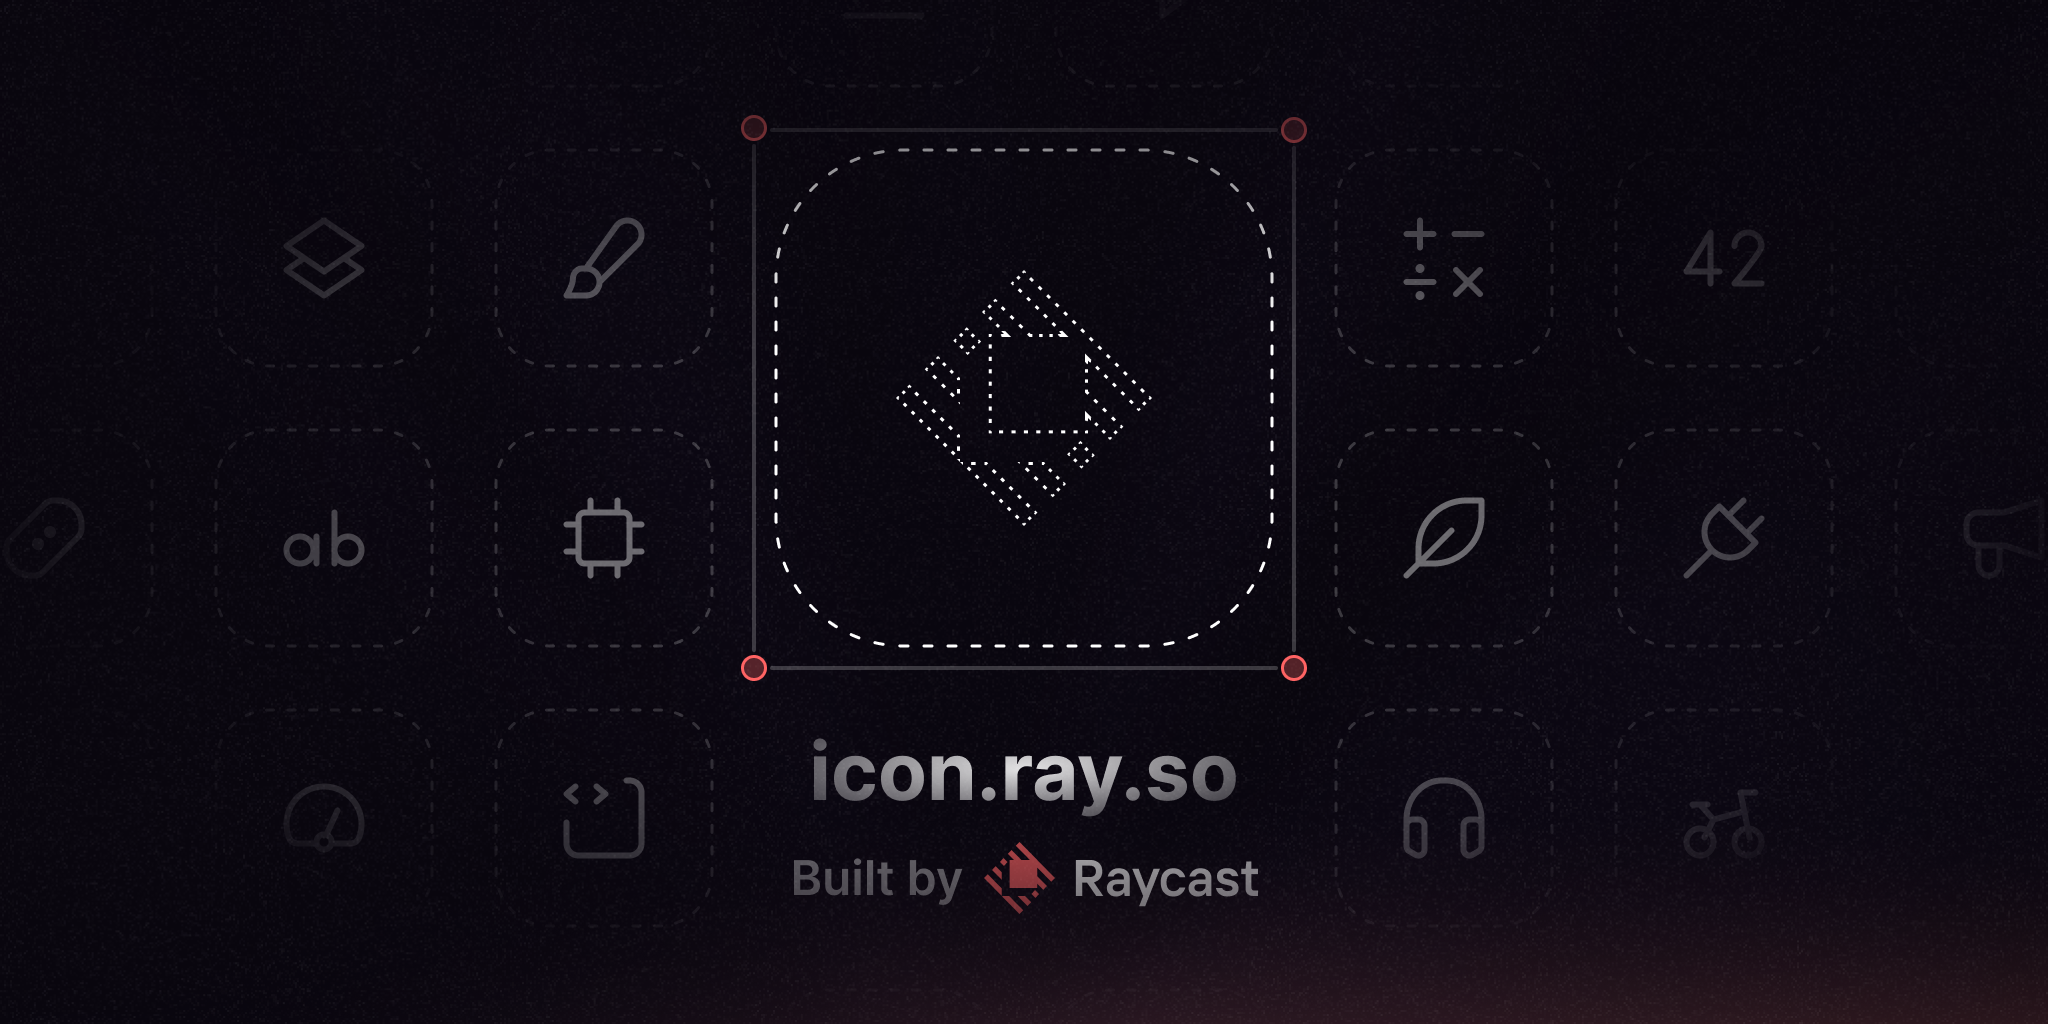 A Raycast logo in dotted lines. Wrapped by a rounded dashed border. Underneath is the URL `icon.ray.so` and "Built by Raycast"